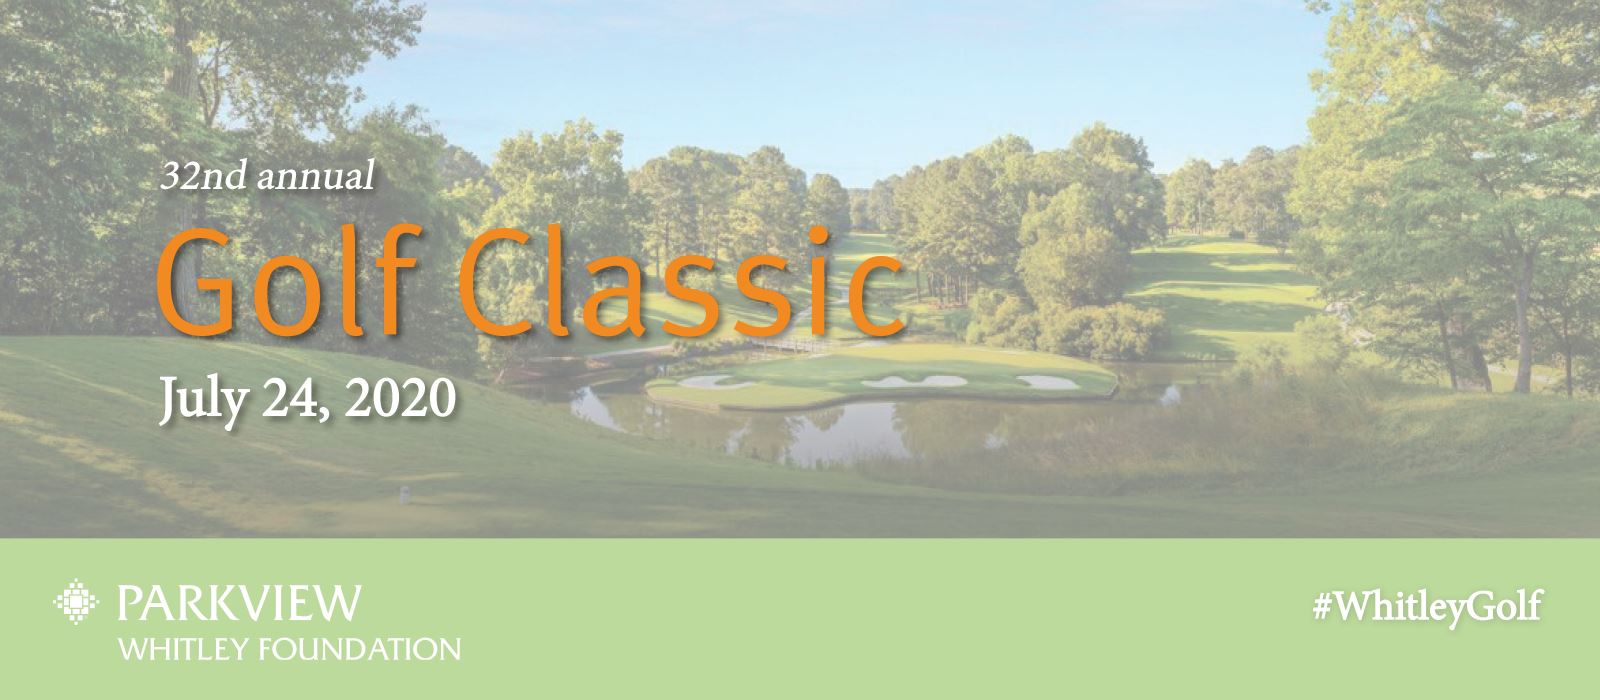 Parkview Whitley Golf Classic